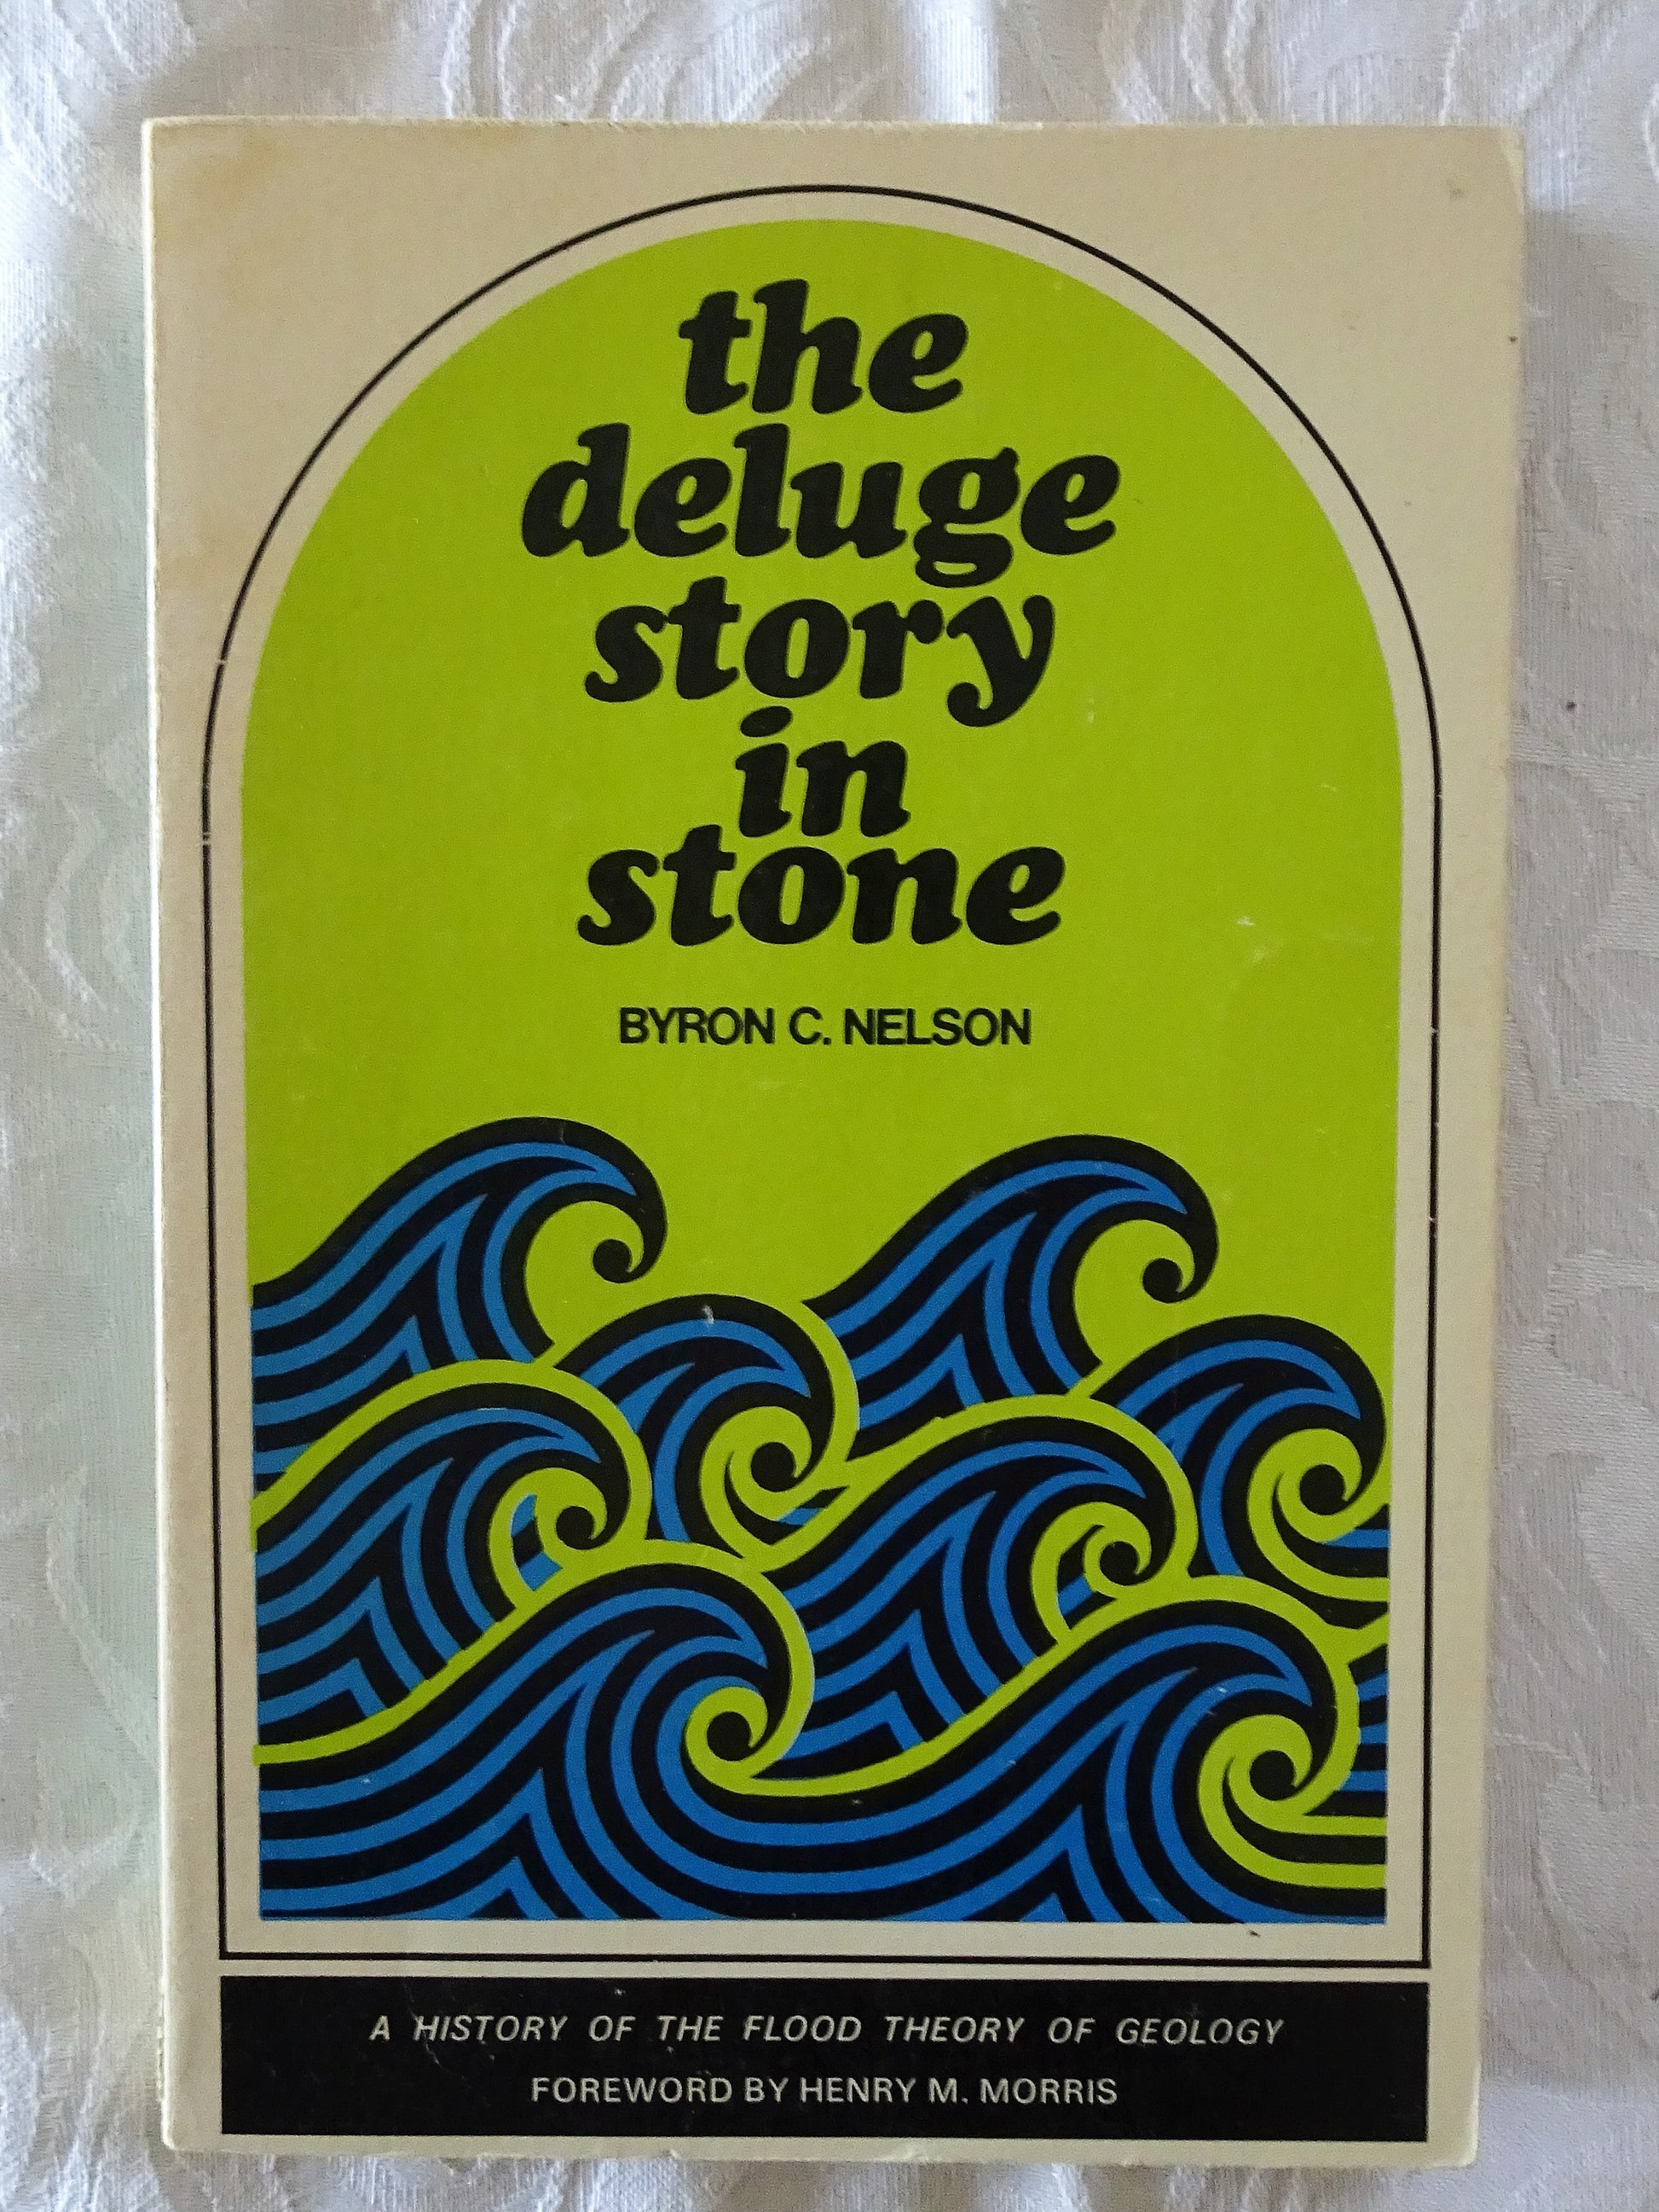 The Deluge Story In Stone  A History of the Flood Theory of Geology  by Byron C. Nelson